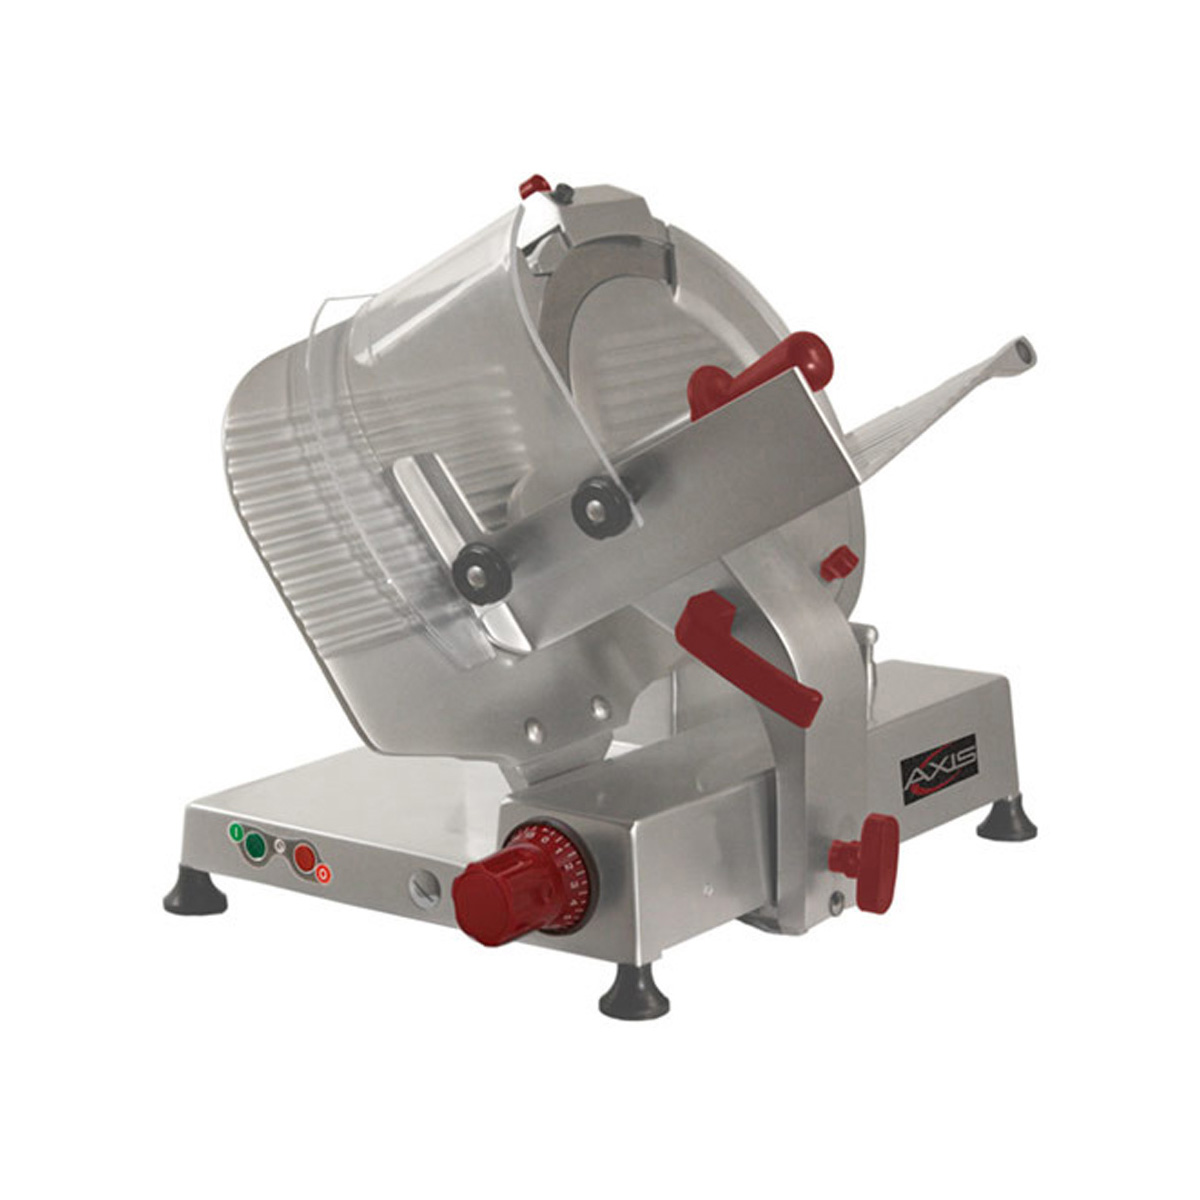 Axis AX-S14 ULTRA Manual Feed Meat Slicer with 14″ Blade, Belt Driven